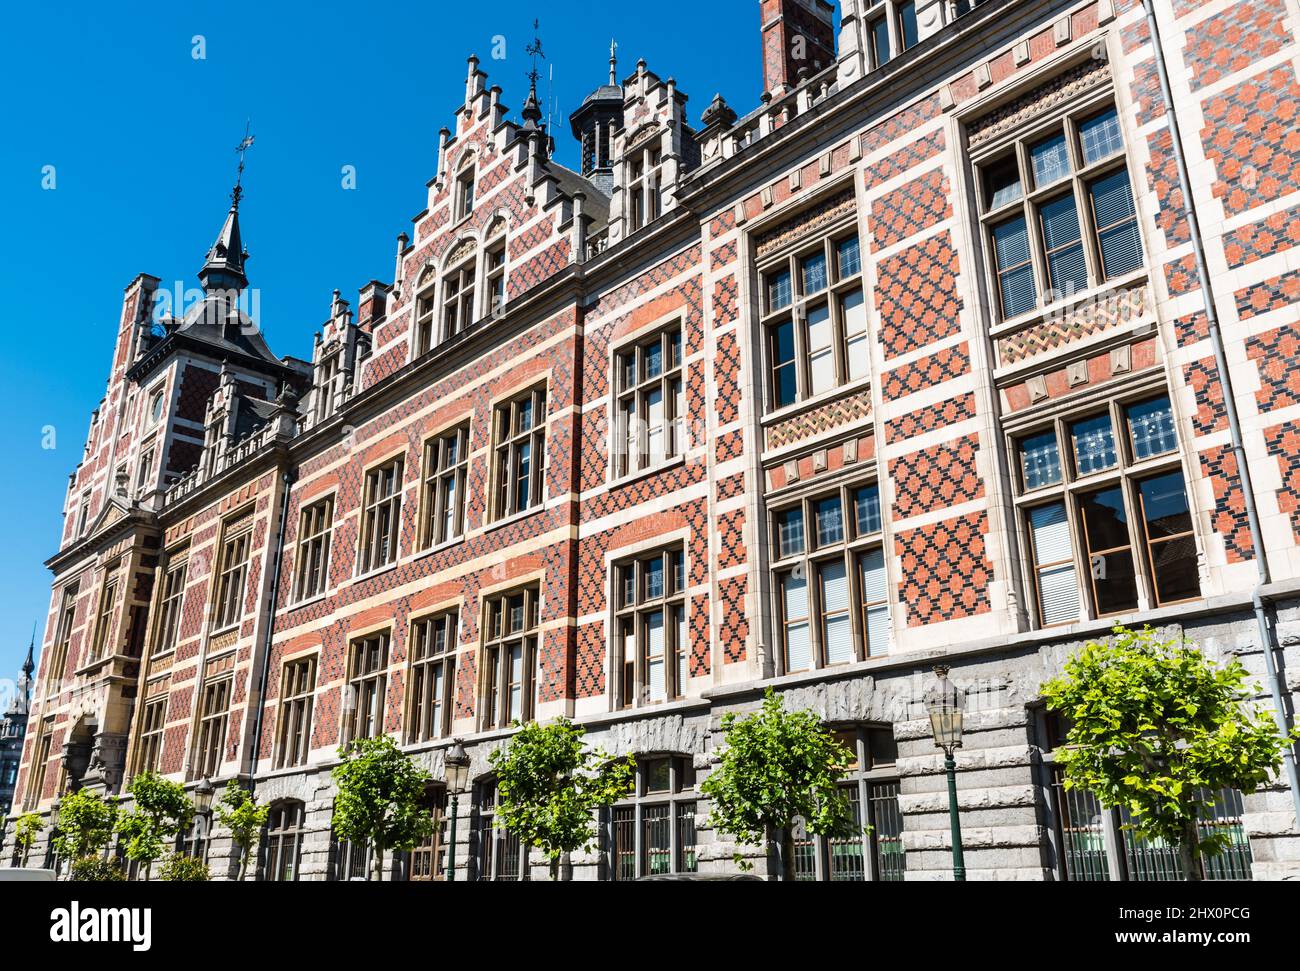 Schaerbeek, Brussels , Belgium - 06 29 2019 - The facade of the town hall in Neo- renaissance style Stock Photo